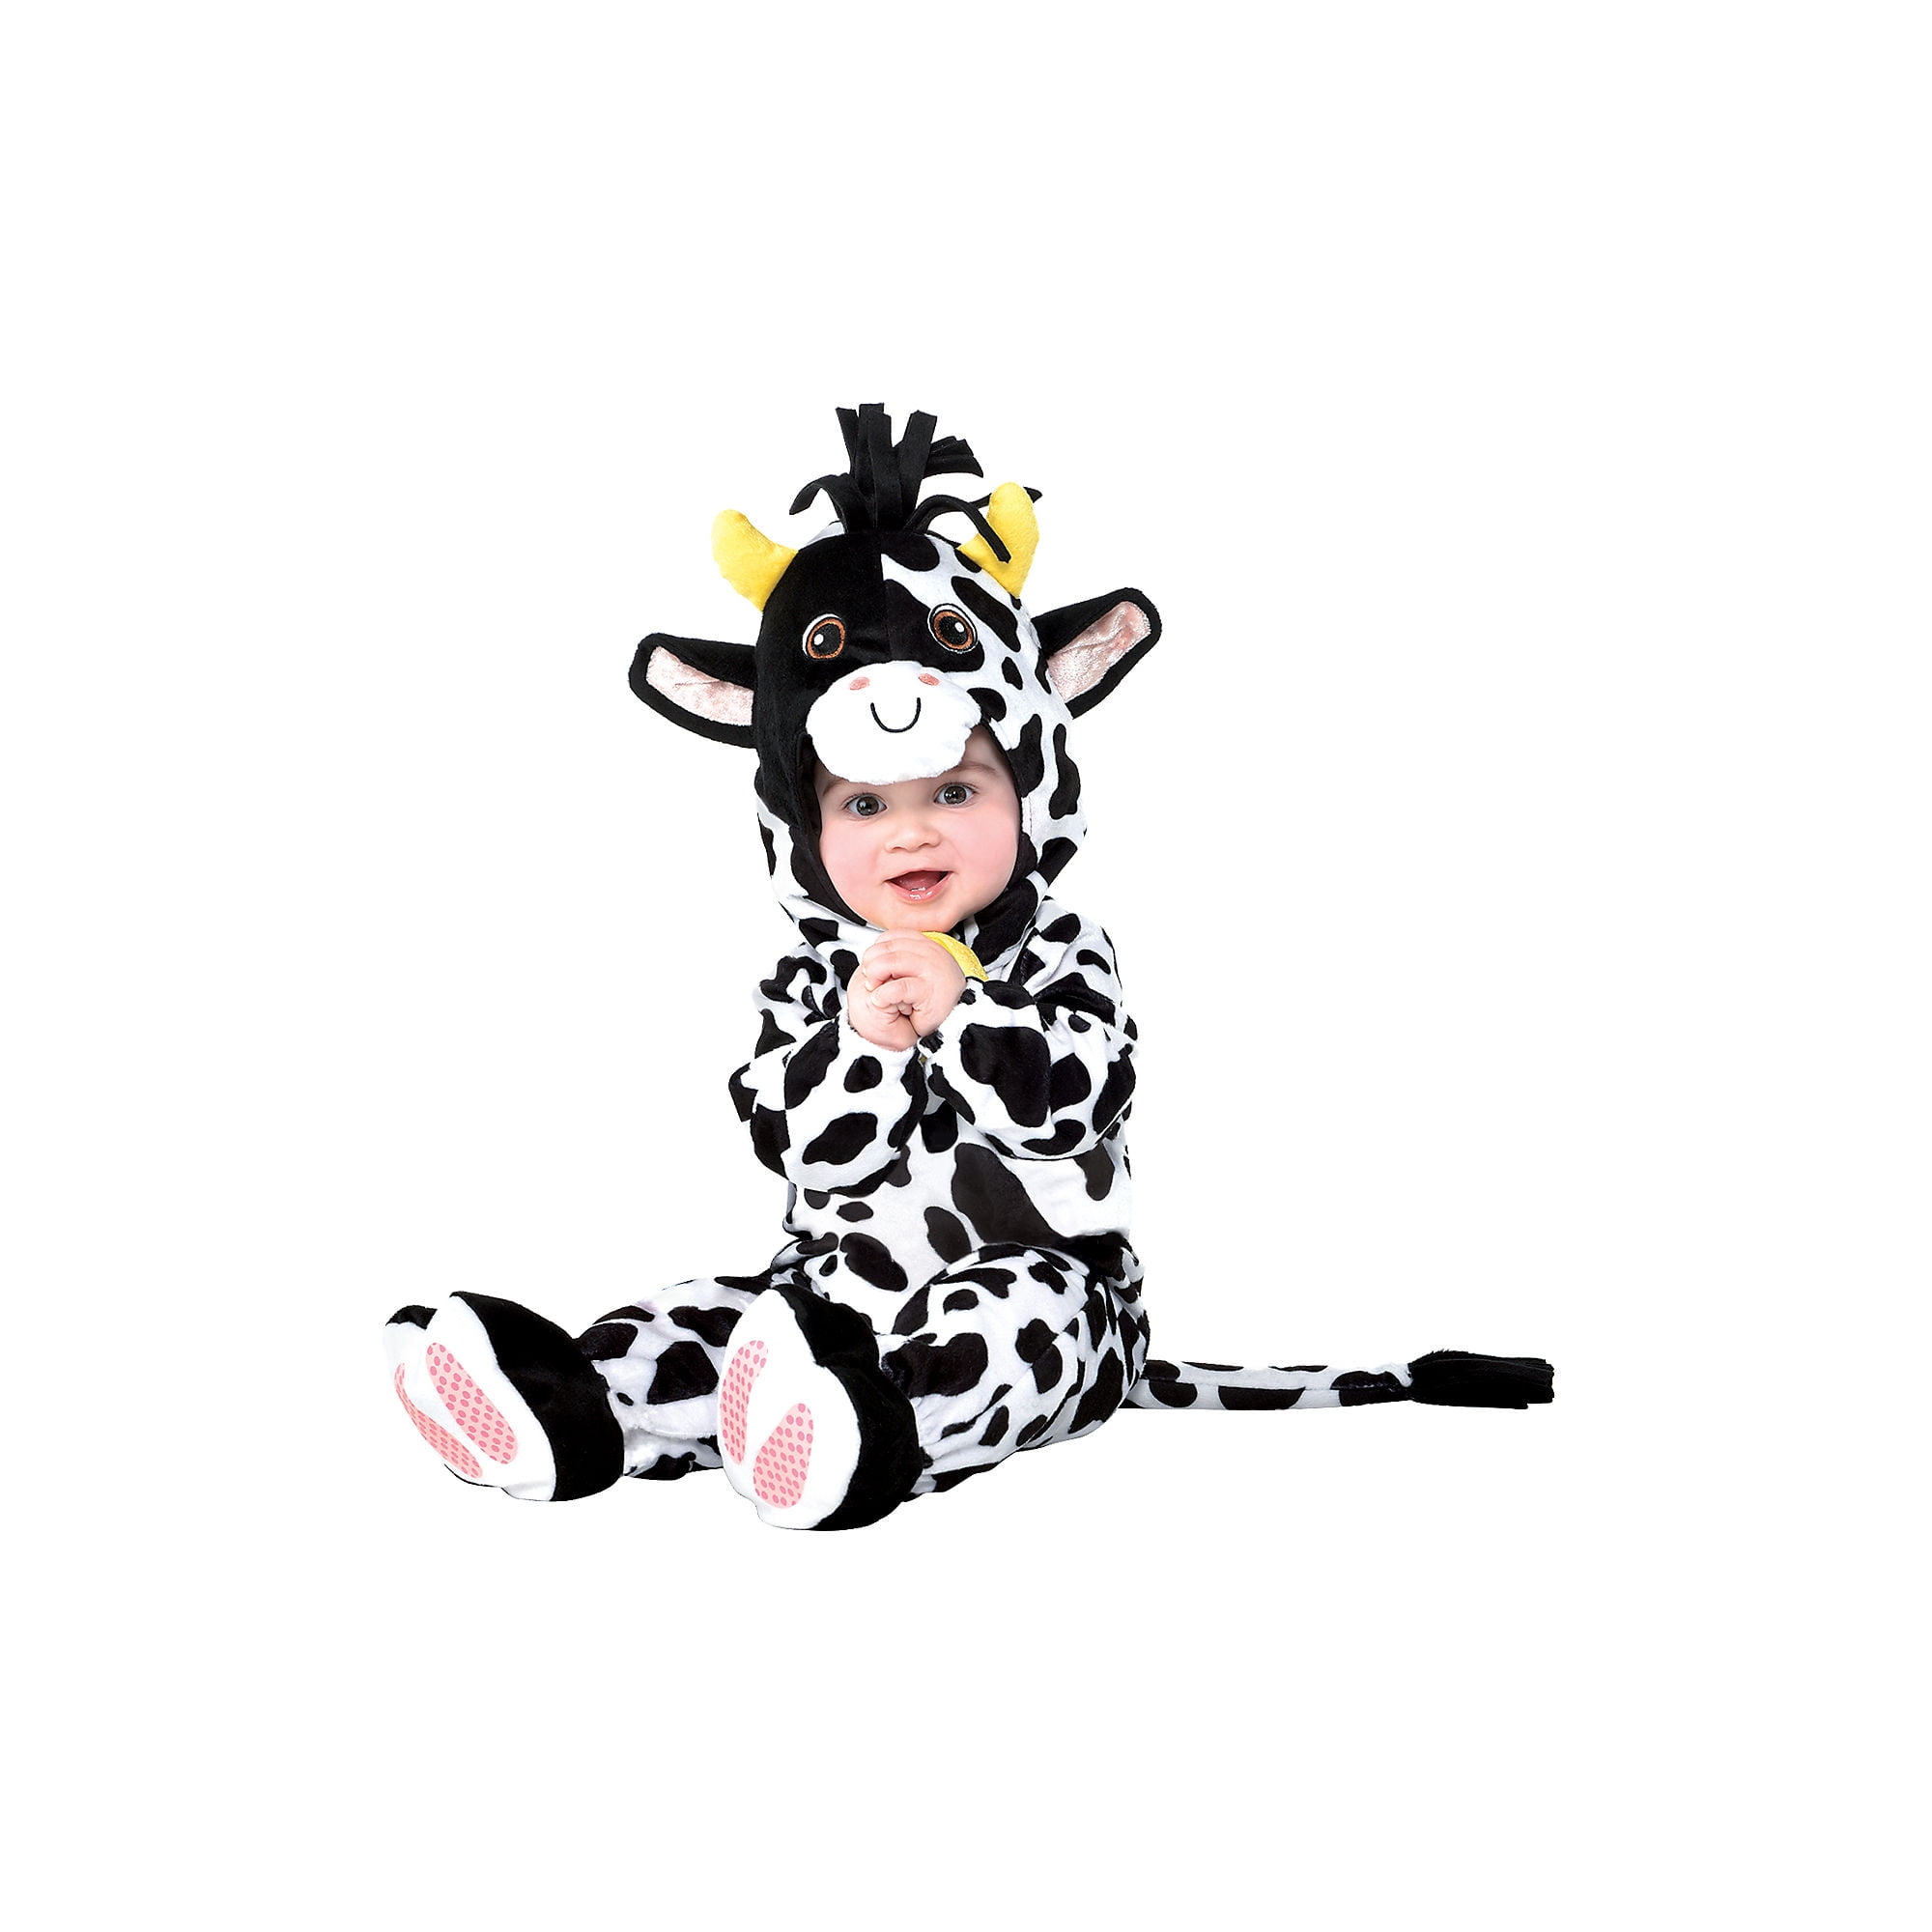 Toddler Cow Costume Size 6-12m